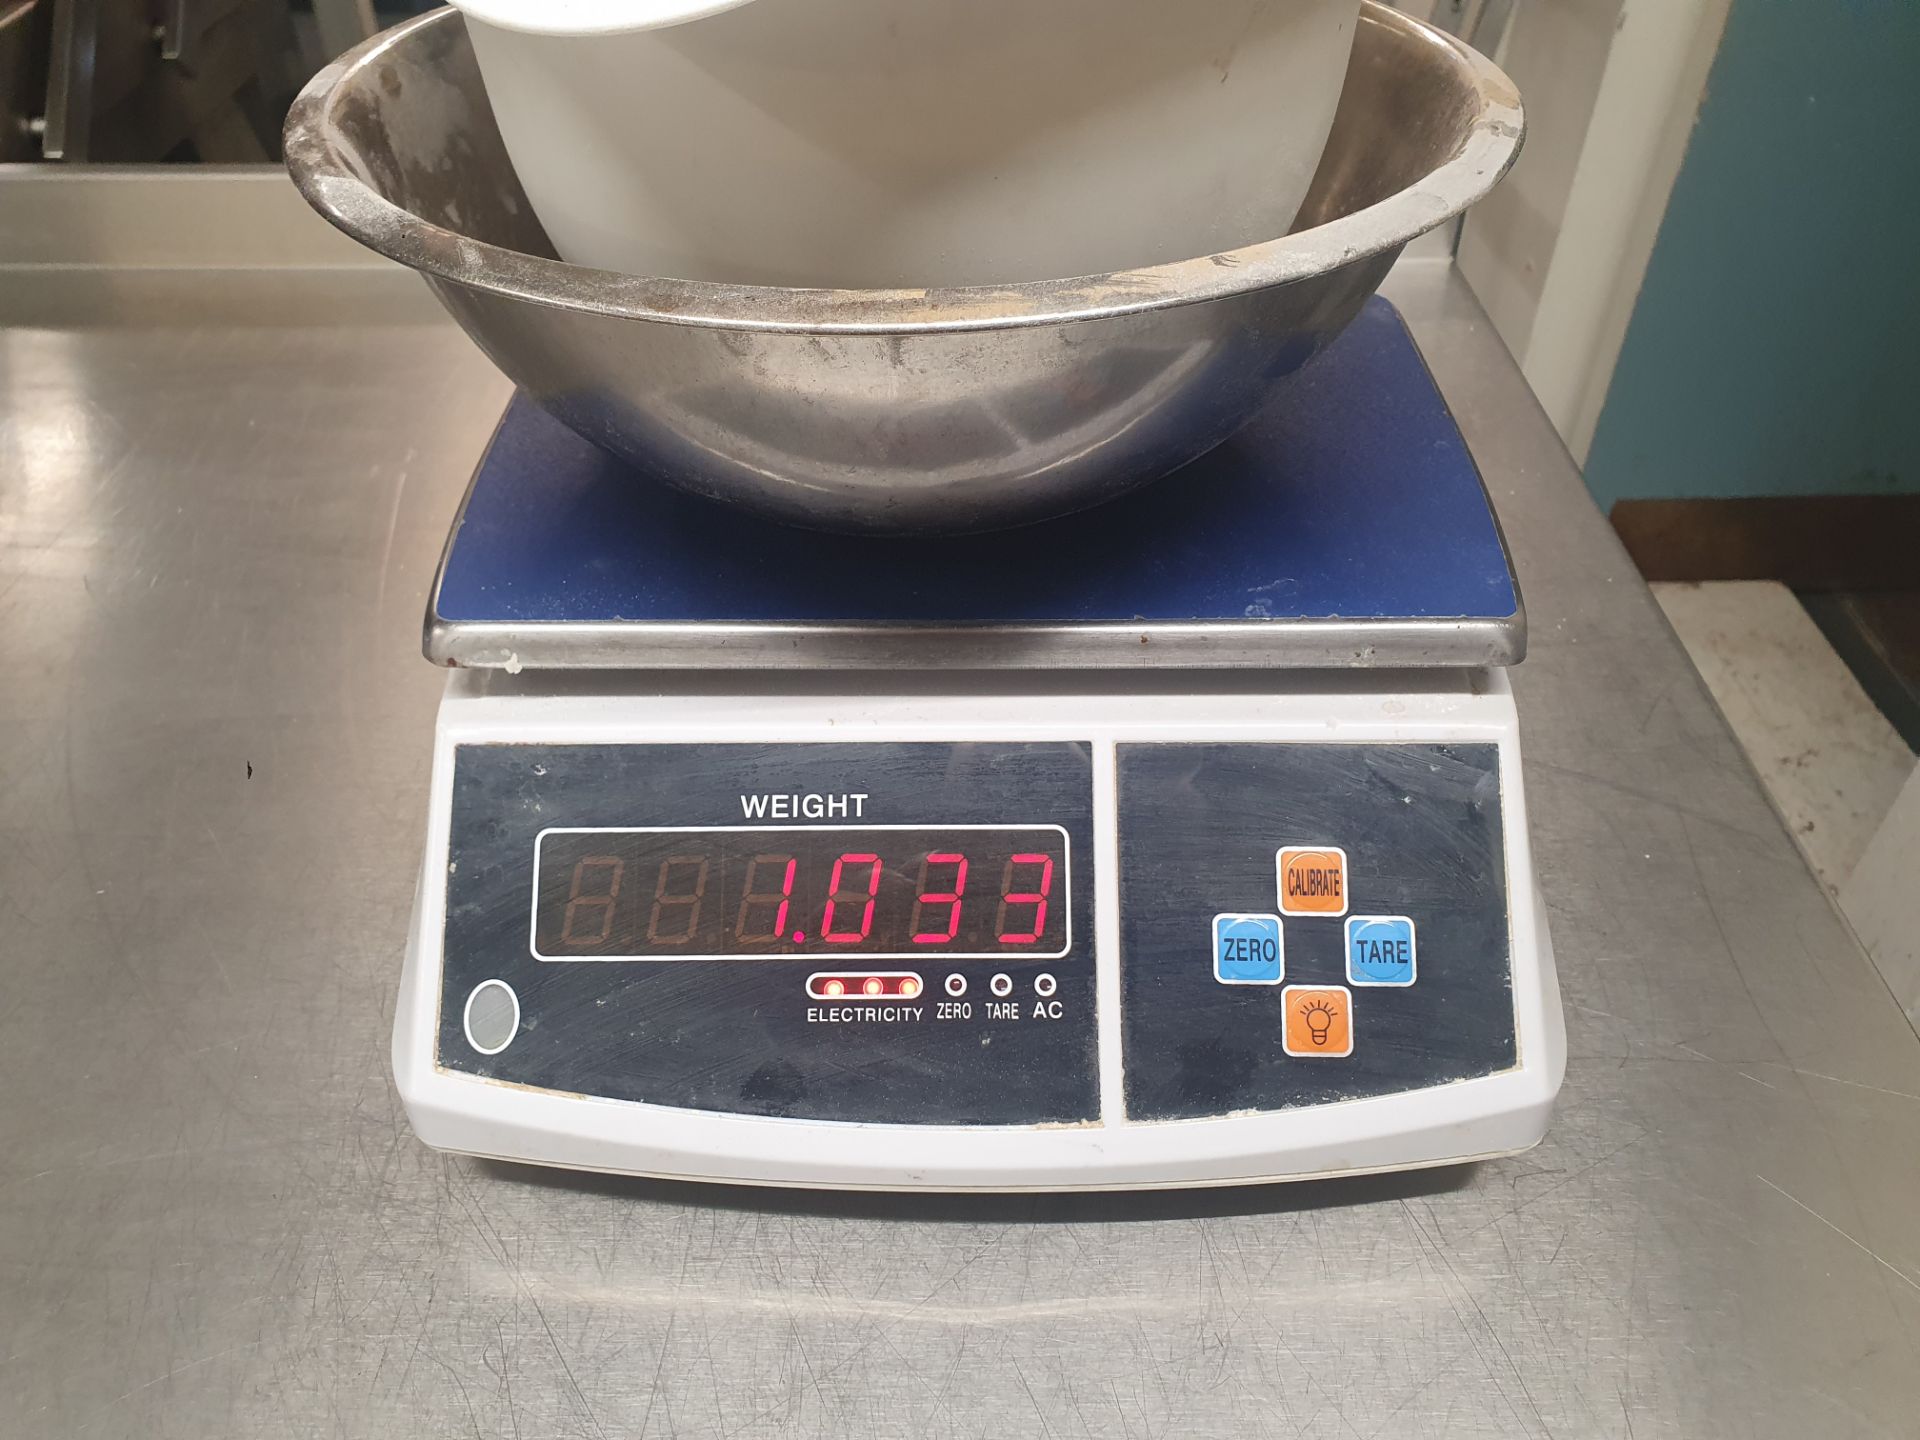 Digital Kitchen Scales. 30kgs Max. Capacity. New. Boxed - Image 6 of 9